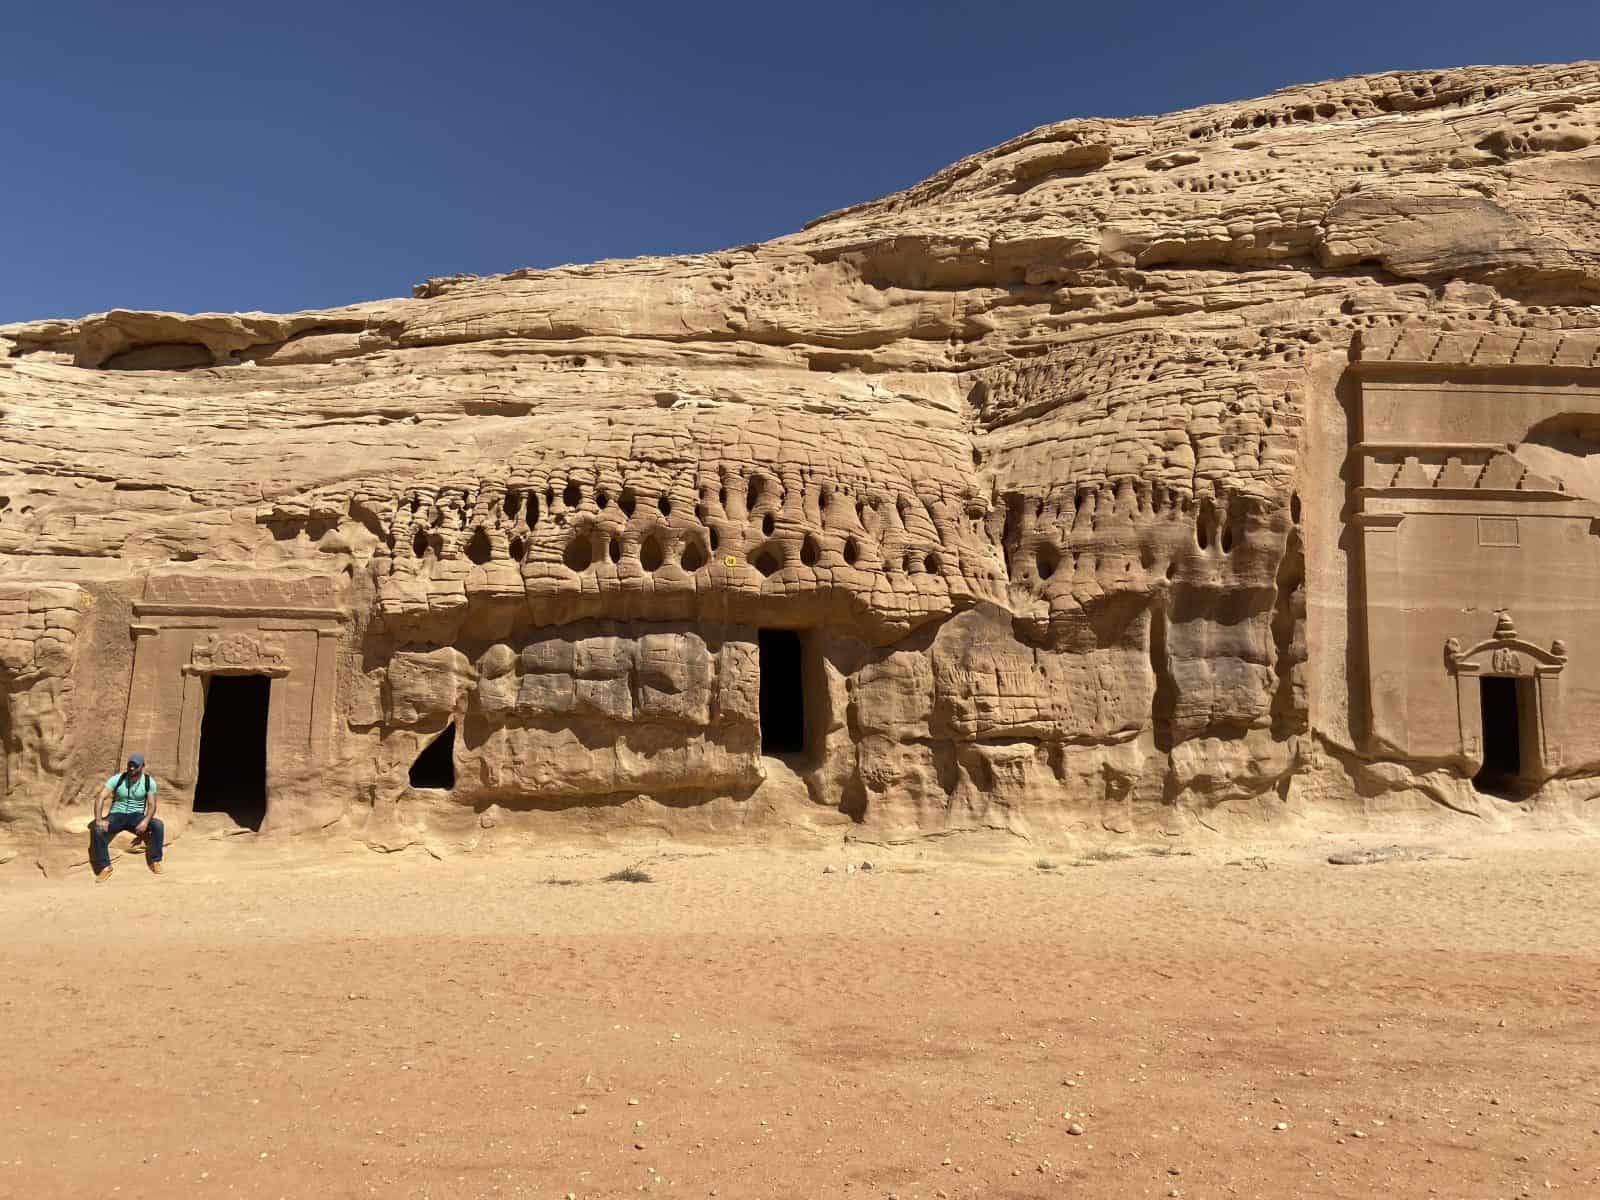 The more elaborate the tomb, the richer the family in Madain Saleh.